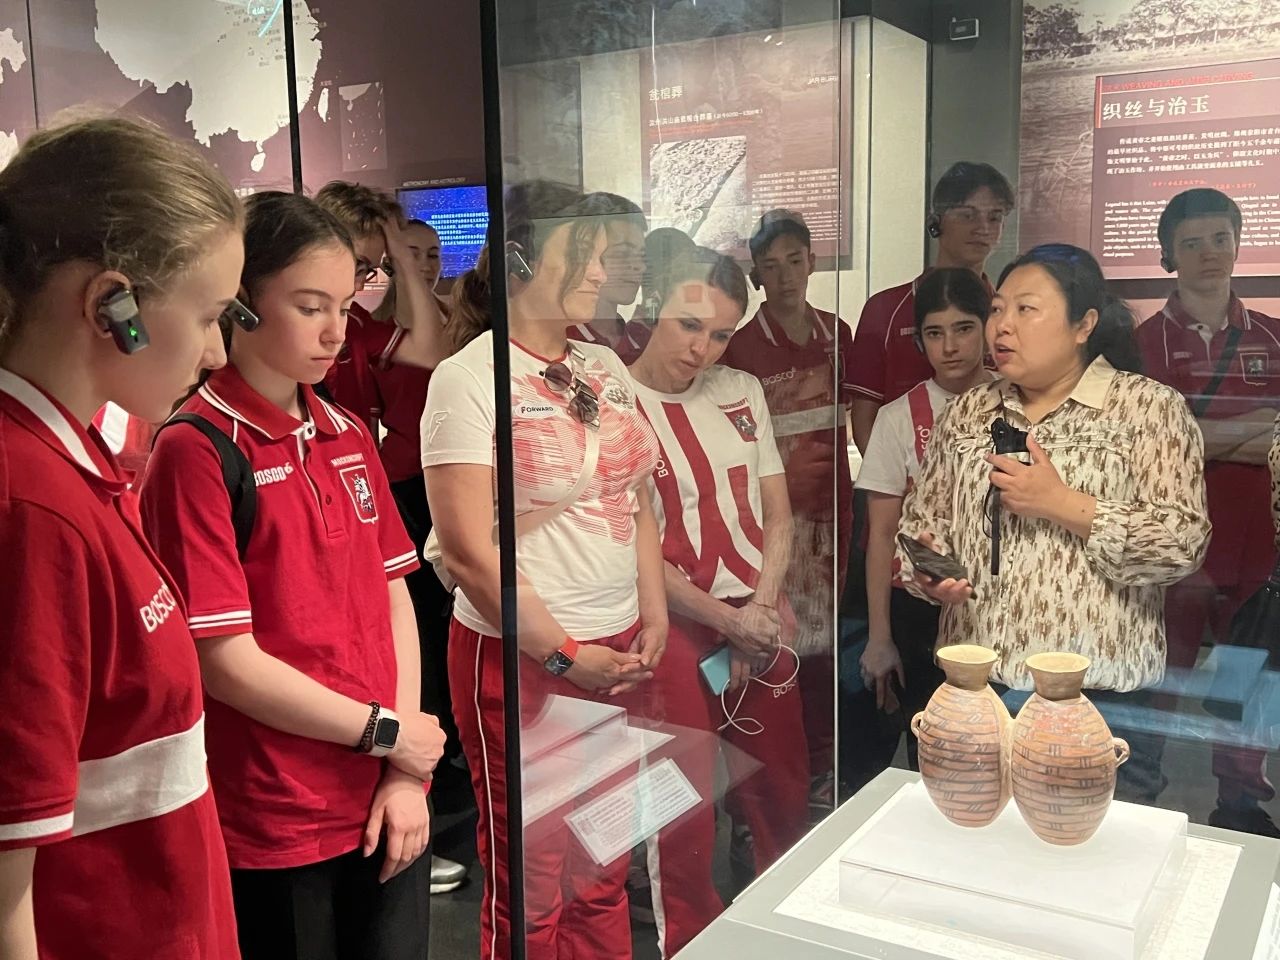 Young martial arts practitioners from Russia visit the Henan Museum in central China’s Henan Province. /Photo provided to CGTN